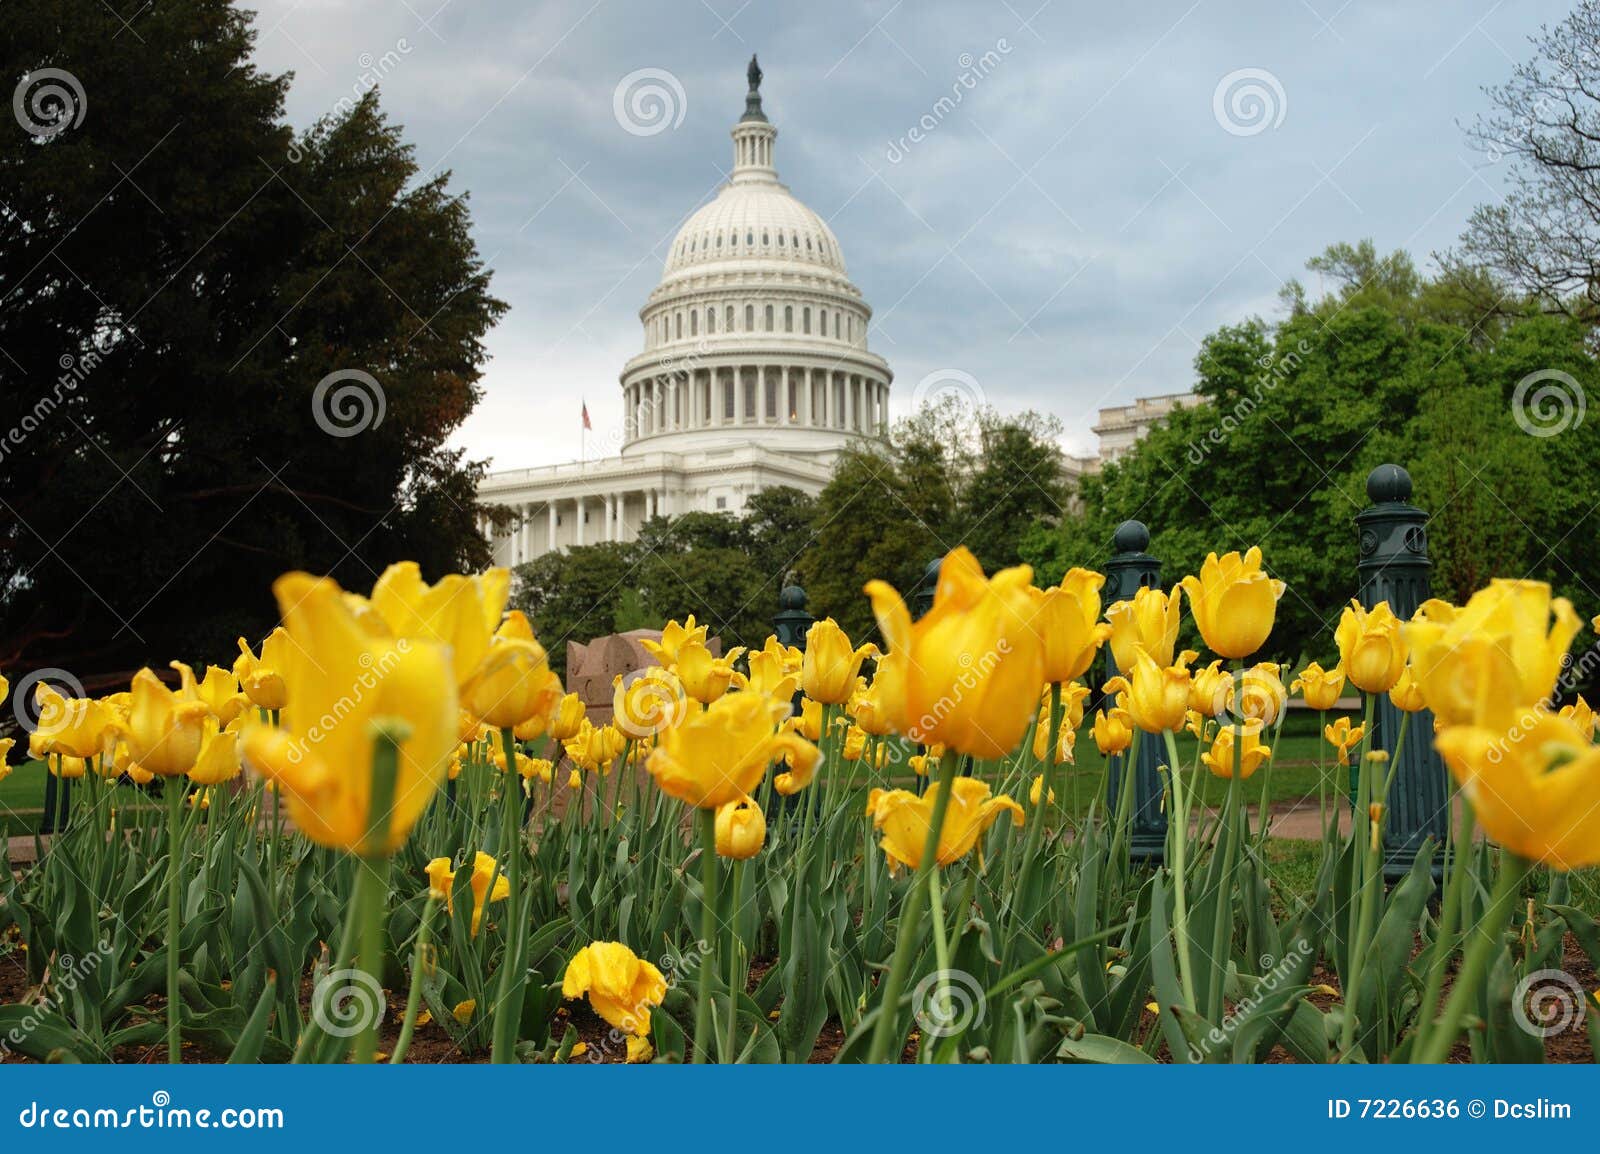 united states capitol in washington dc with yellow